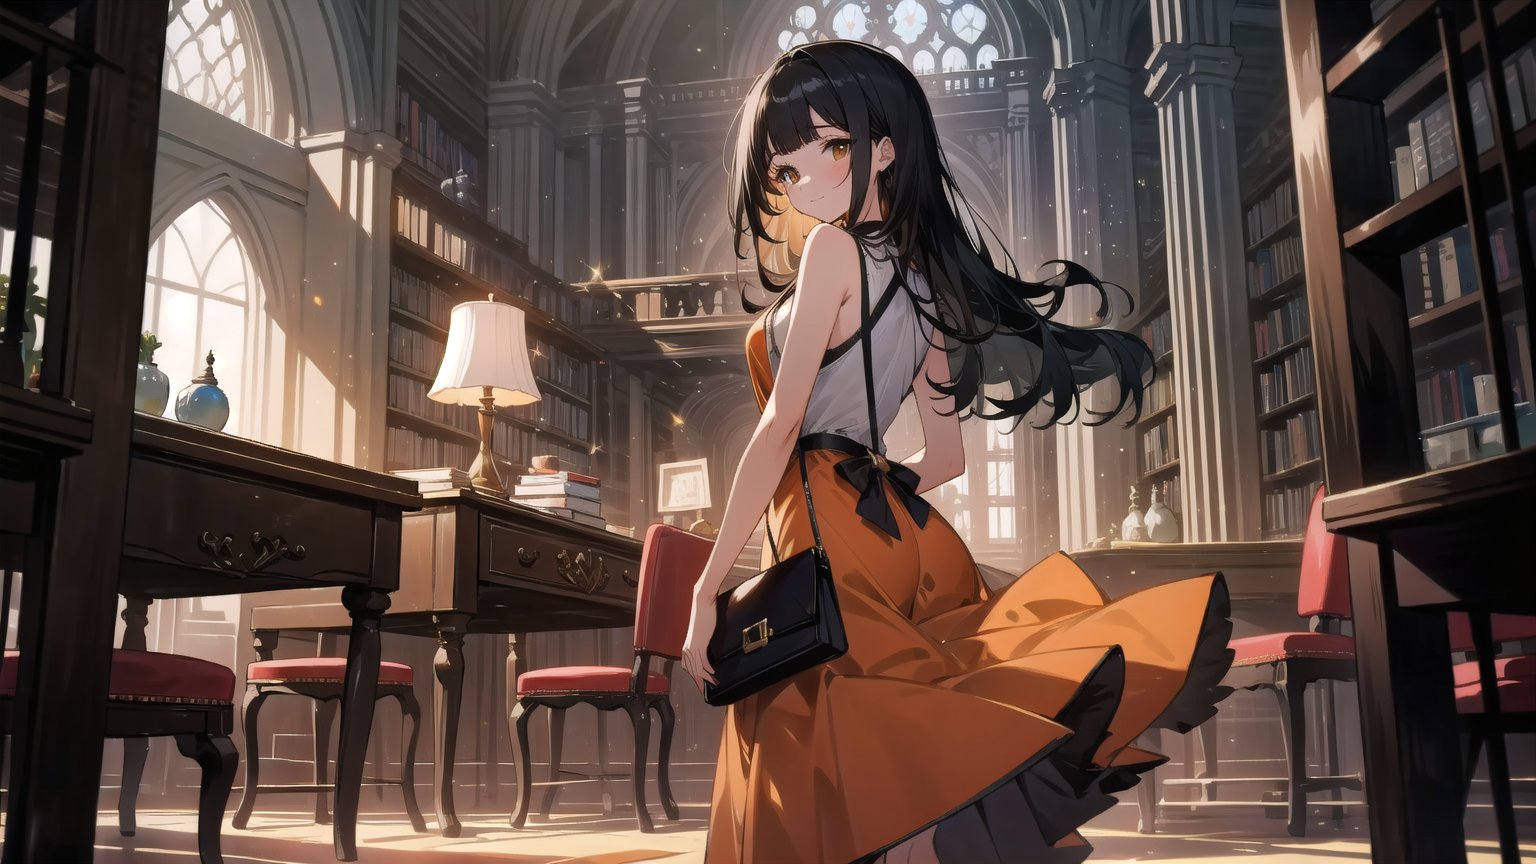 A stunning 8k CG masterpiece of a young woman, her long black hair cascading down her back with blunt bangs framing her heart-shaped face. Her bright brown eyes sparkle as she gazes directly at the viewer, a warm smile spreading across her features. She stands confidently, sleeveless and sans shoes, wearing an vibrant orange dress that complements the rich wood tones of the library's interior. A slender handbag hangs elegantly from her arm, adding to the overall sense of refinement. The lighting is soft and even, casting no harsh shadows as she stands amidst towering bookshelves.,girl